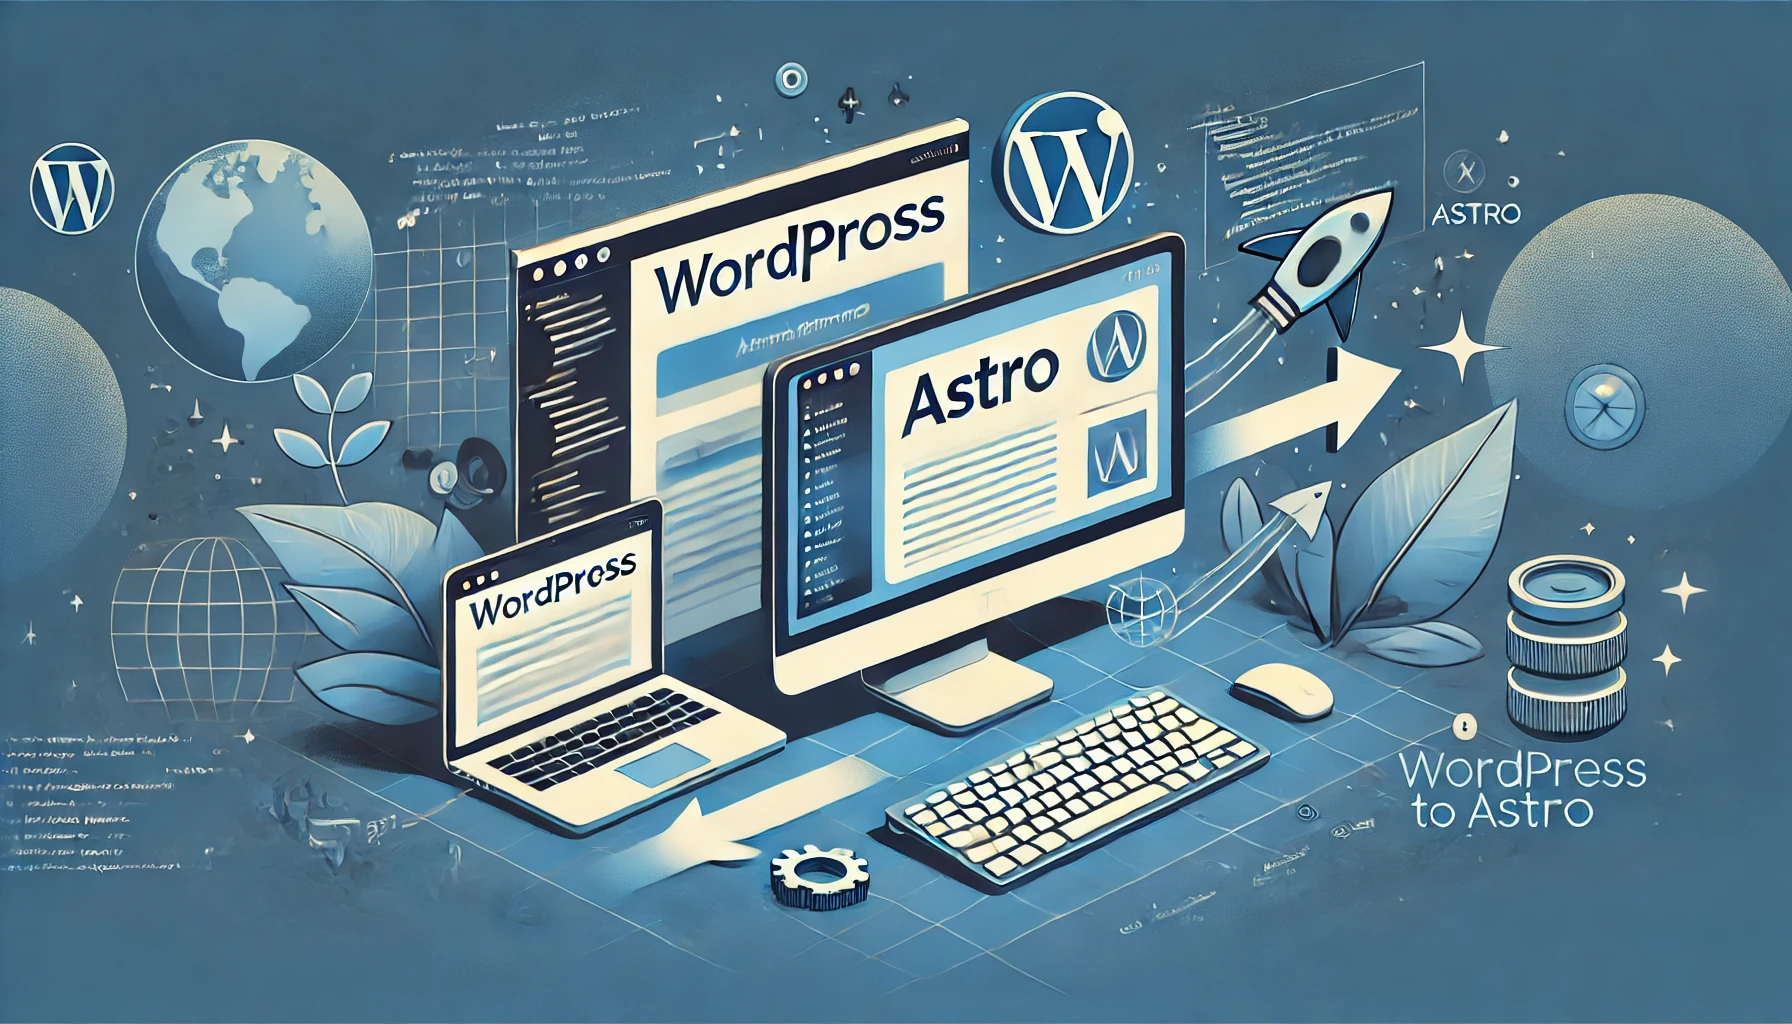 A landscape image illustrating the migration of a blog from WordPress to Astro.